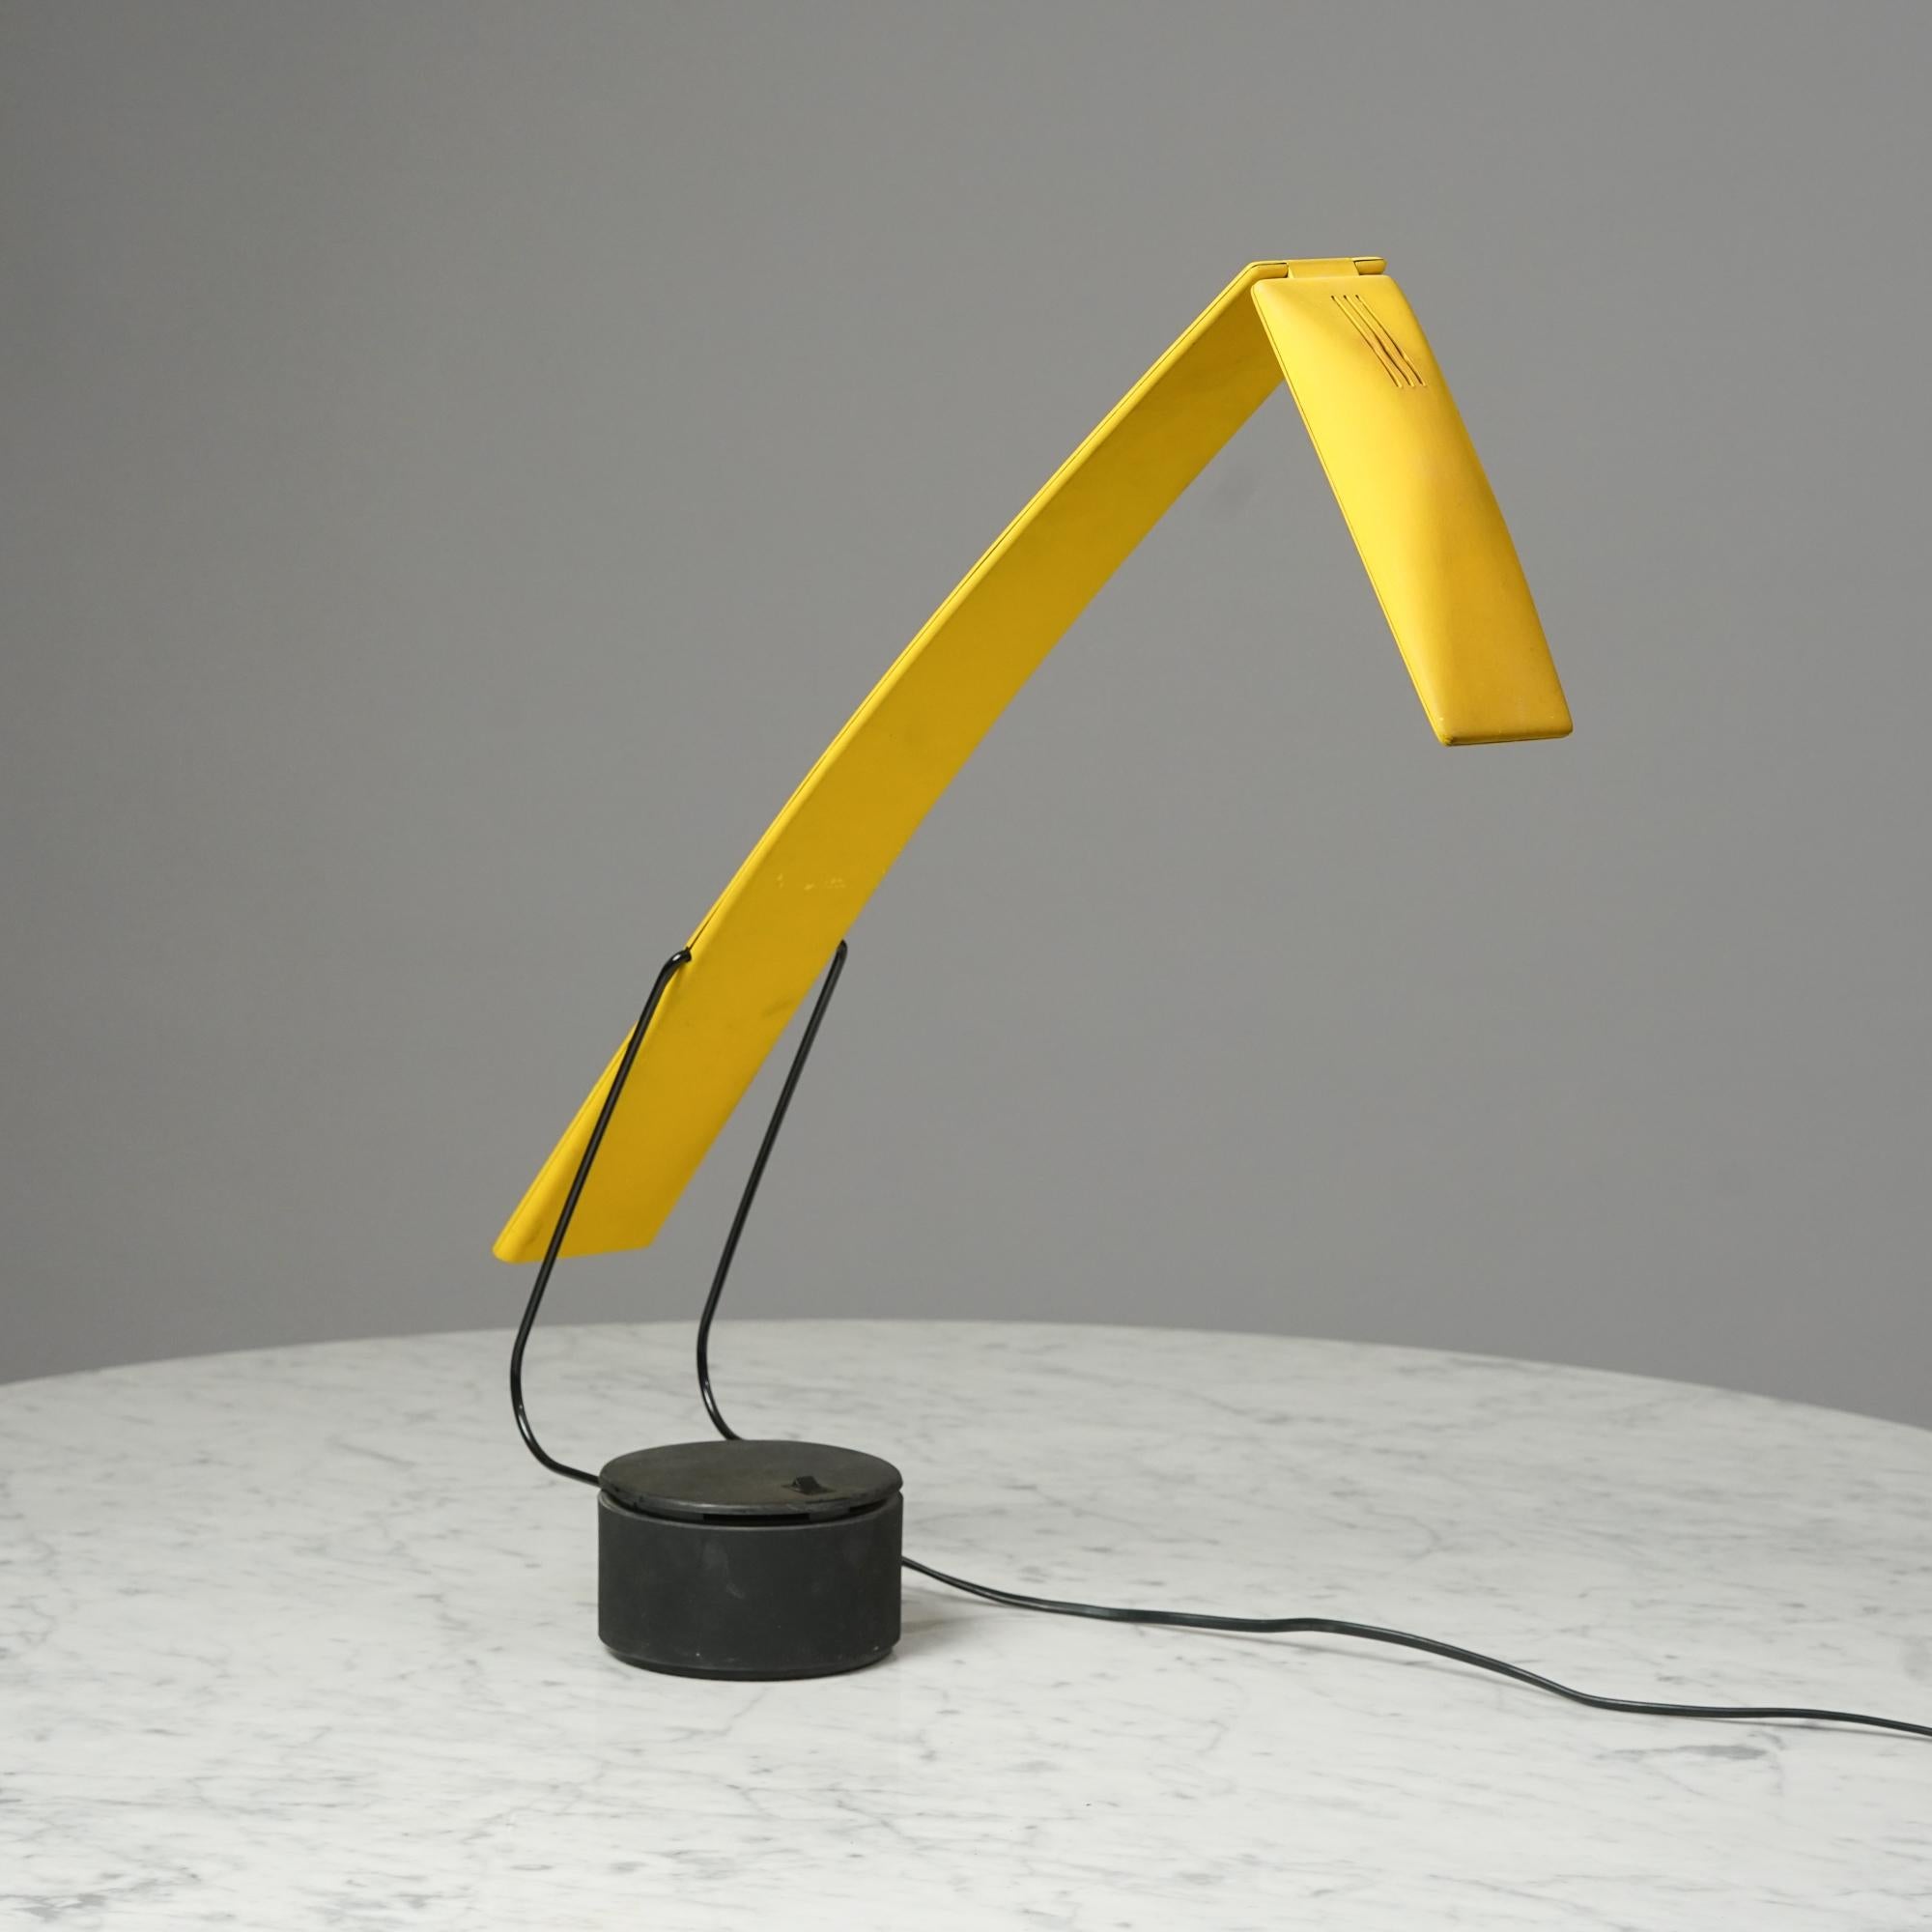 Dove lamp by Mario Barbaglia and Marco Colombo for PAF Studio in the 1980s. Metal stand and yellow plastic frame. Adjustable height. Good vintage condition, wear consistent with age and use. Manufactures mark on the bottom. 